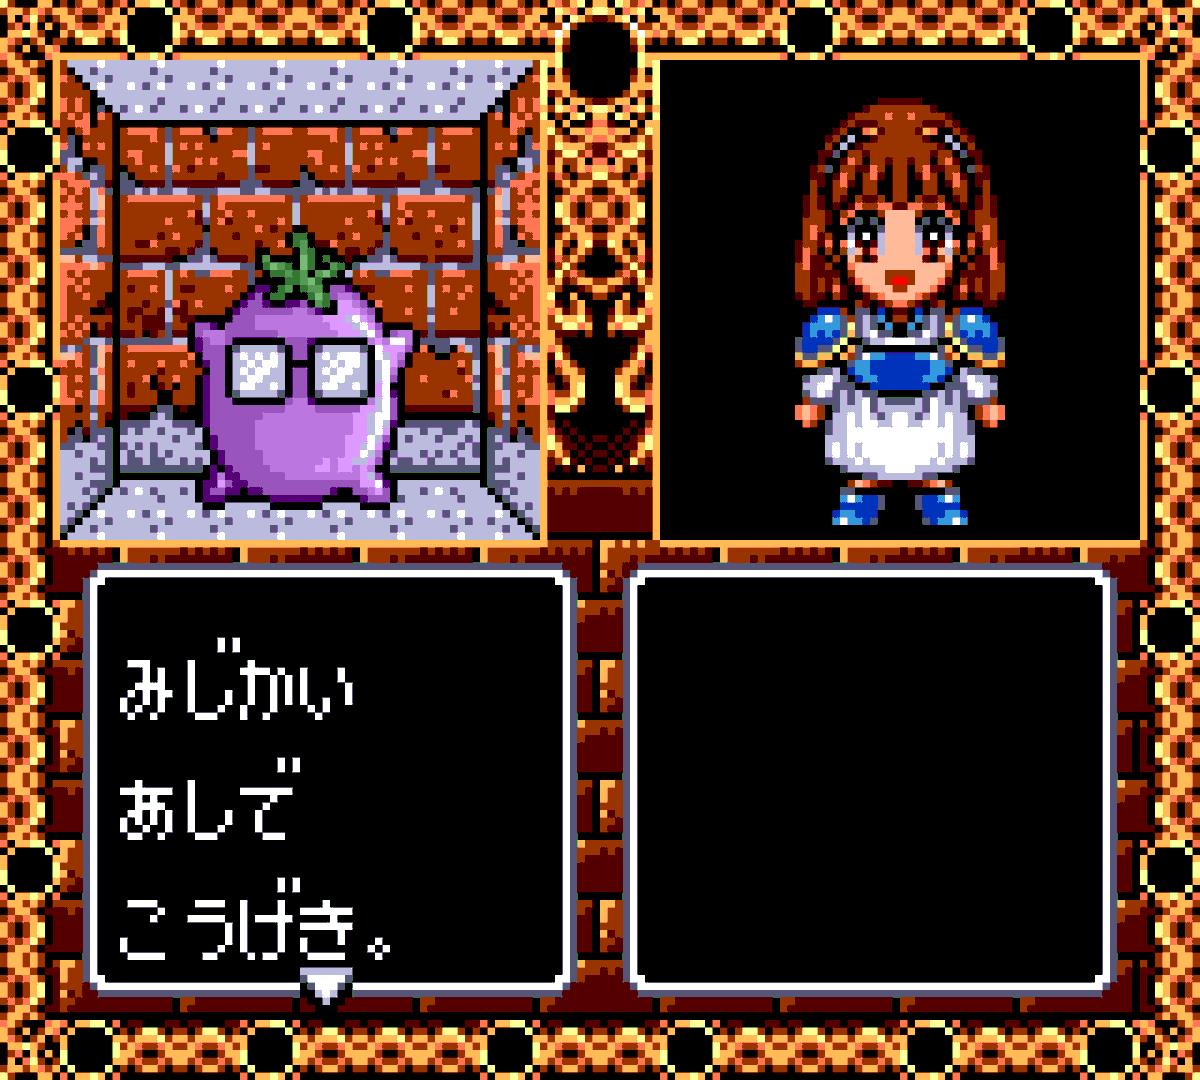 I feel whenever the game asks me a question, it's going to end badly.This time an, uh, eggplant ghost busted out and flailed their tiny arms at me. So I blew them up with ice magic and then pickled them in soy sauce.Yum~~